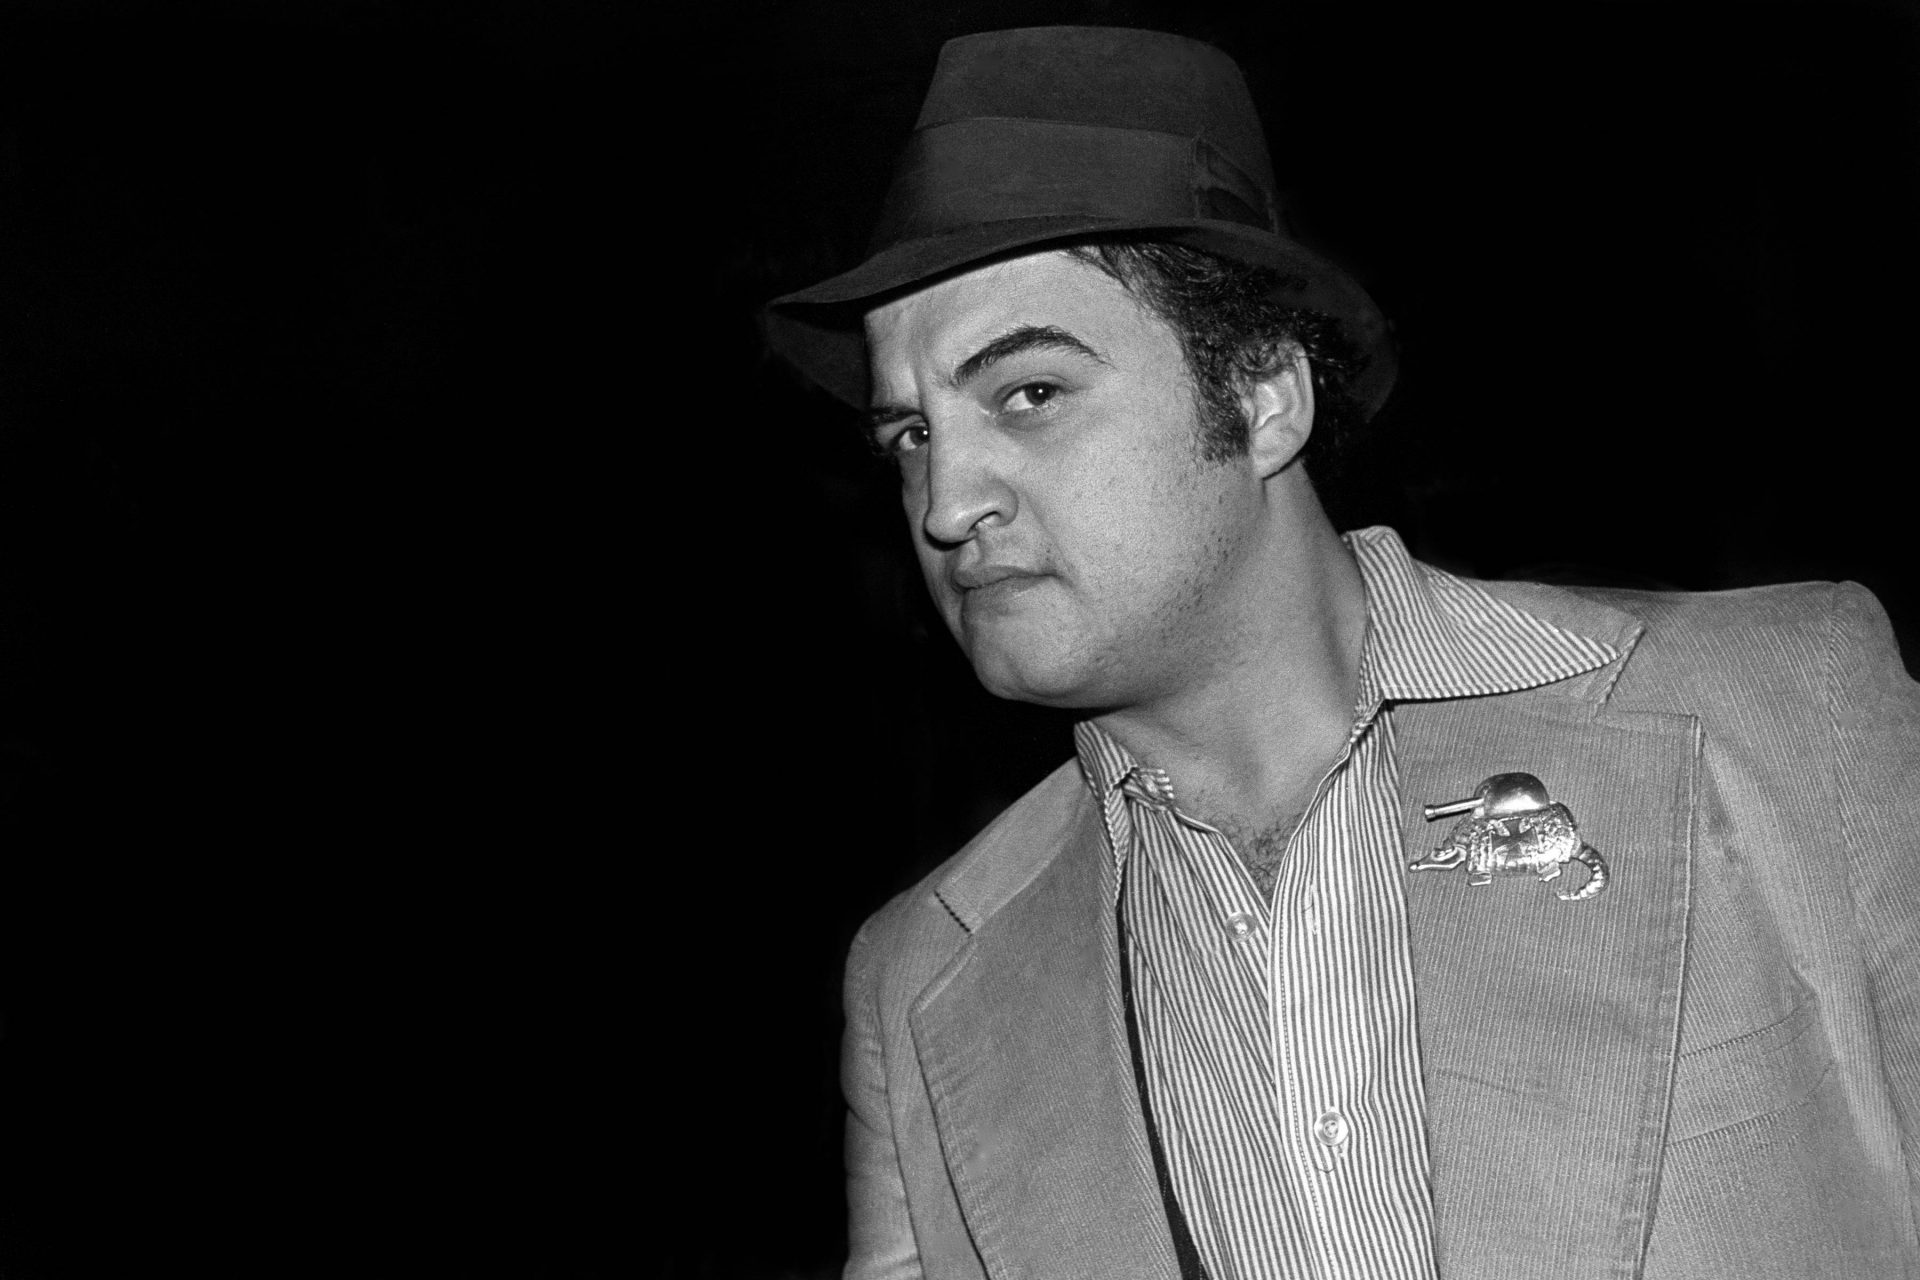 <p>33 years old -  One of the mythical Blues Brothers and a regular at Saturday Night Live, he looked older than he really was. The addictions took their toll. In the end, Belushi lost his life in Los Angeles after an overdose of heroin and cocaine.</p>